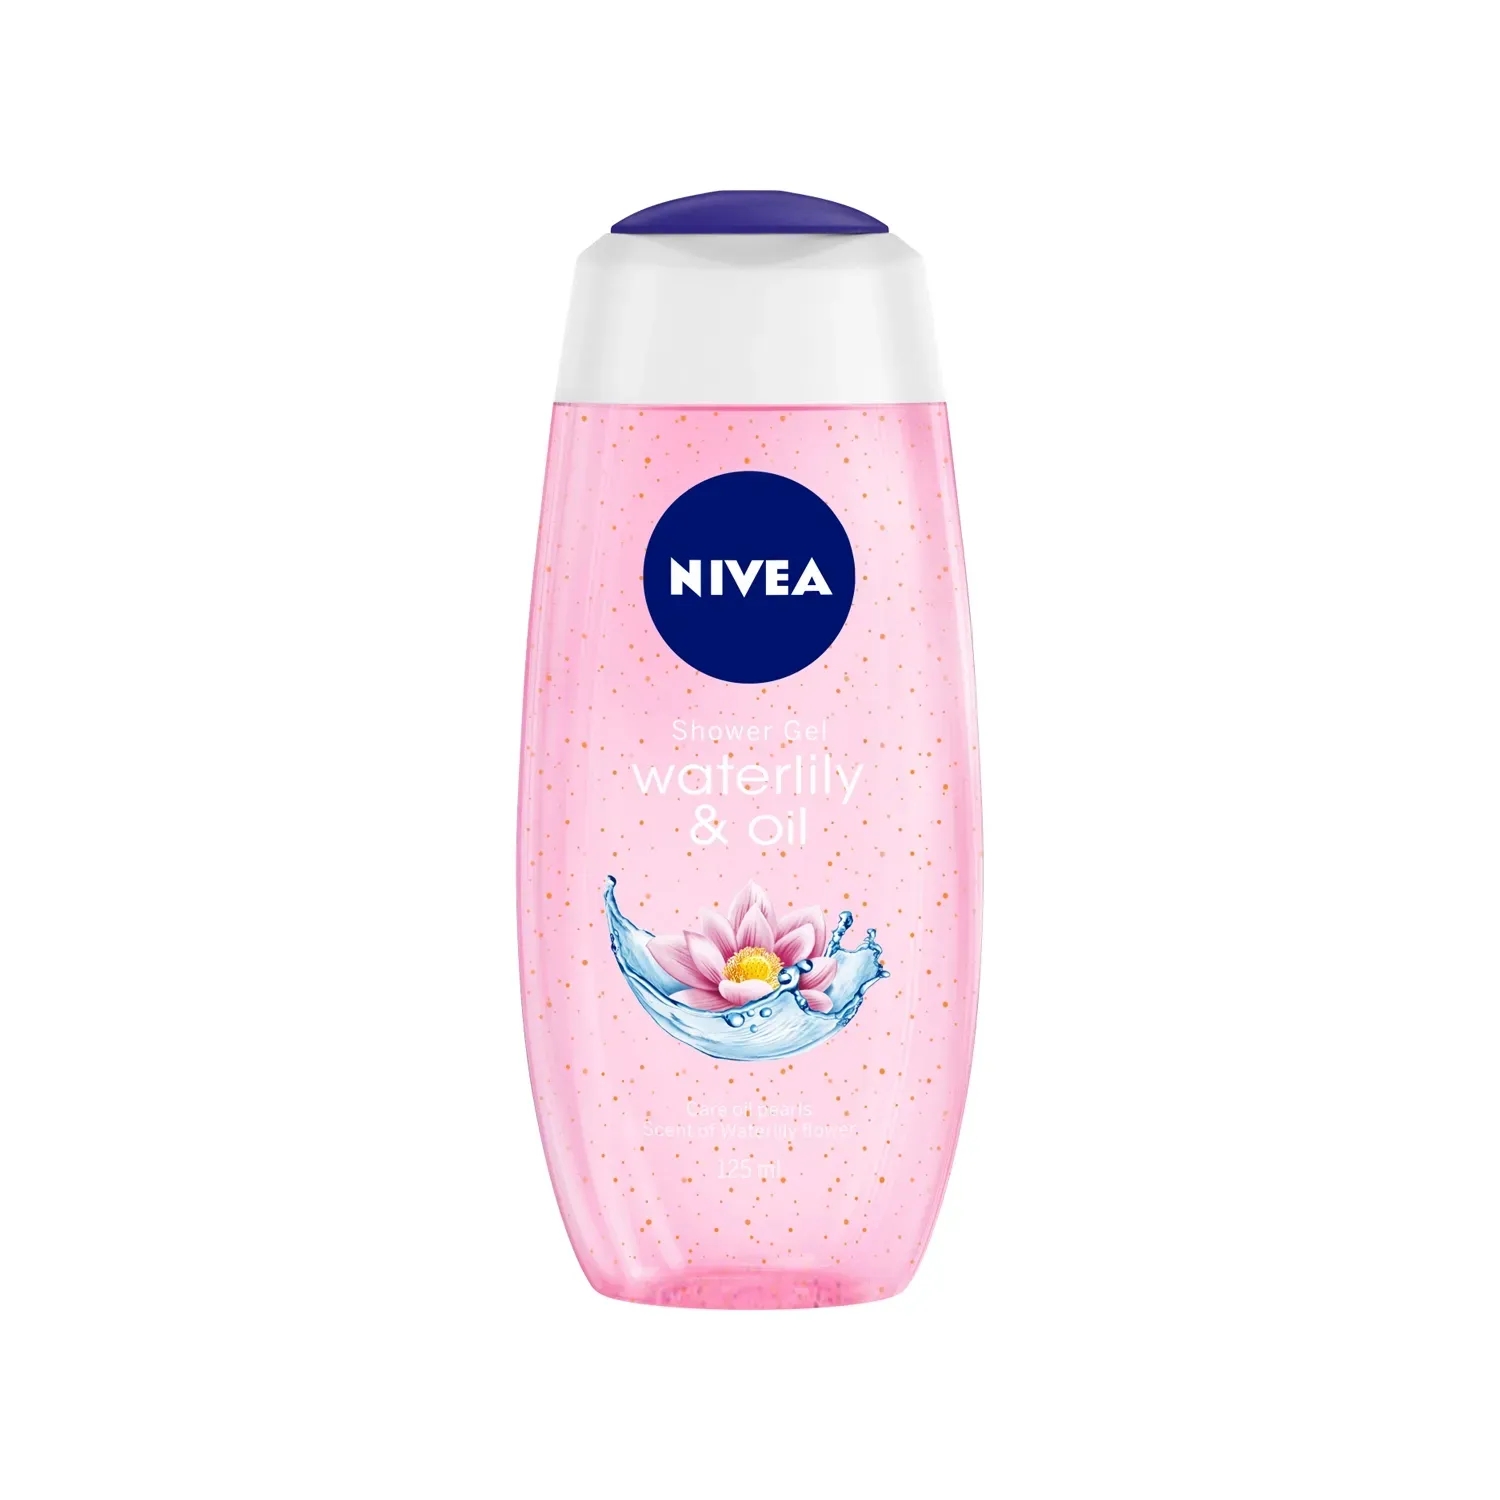 Nivea Water Lily & Oil Body Wash And Shower Gel (125ml)